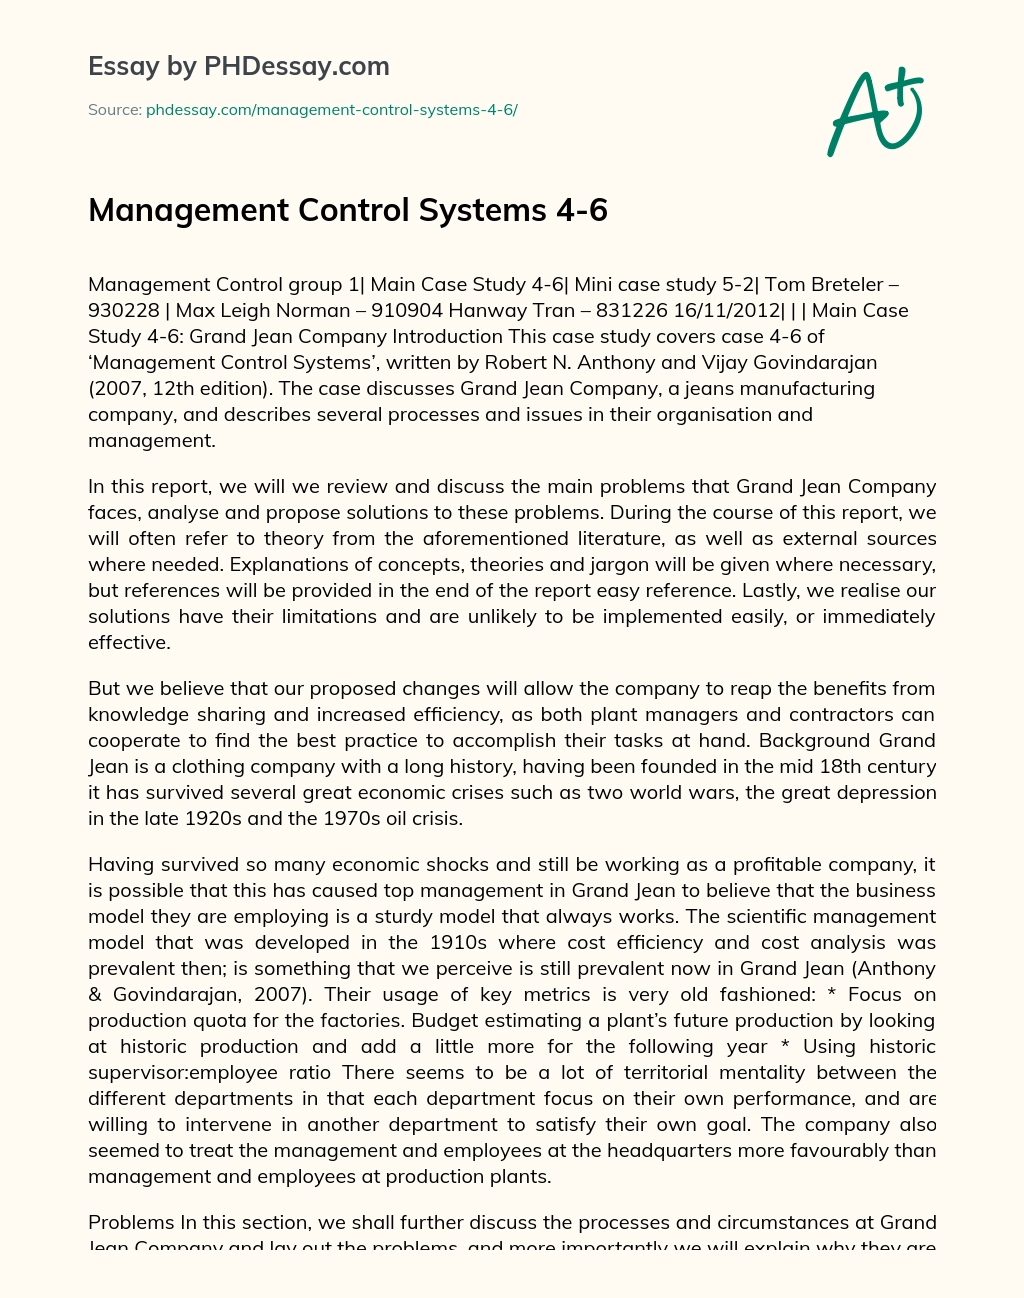 Management Control Systems 4-6 essay